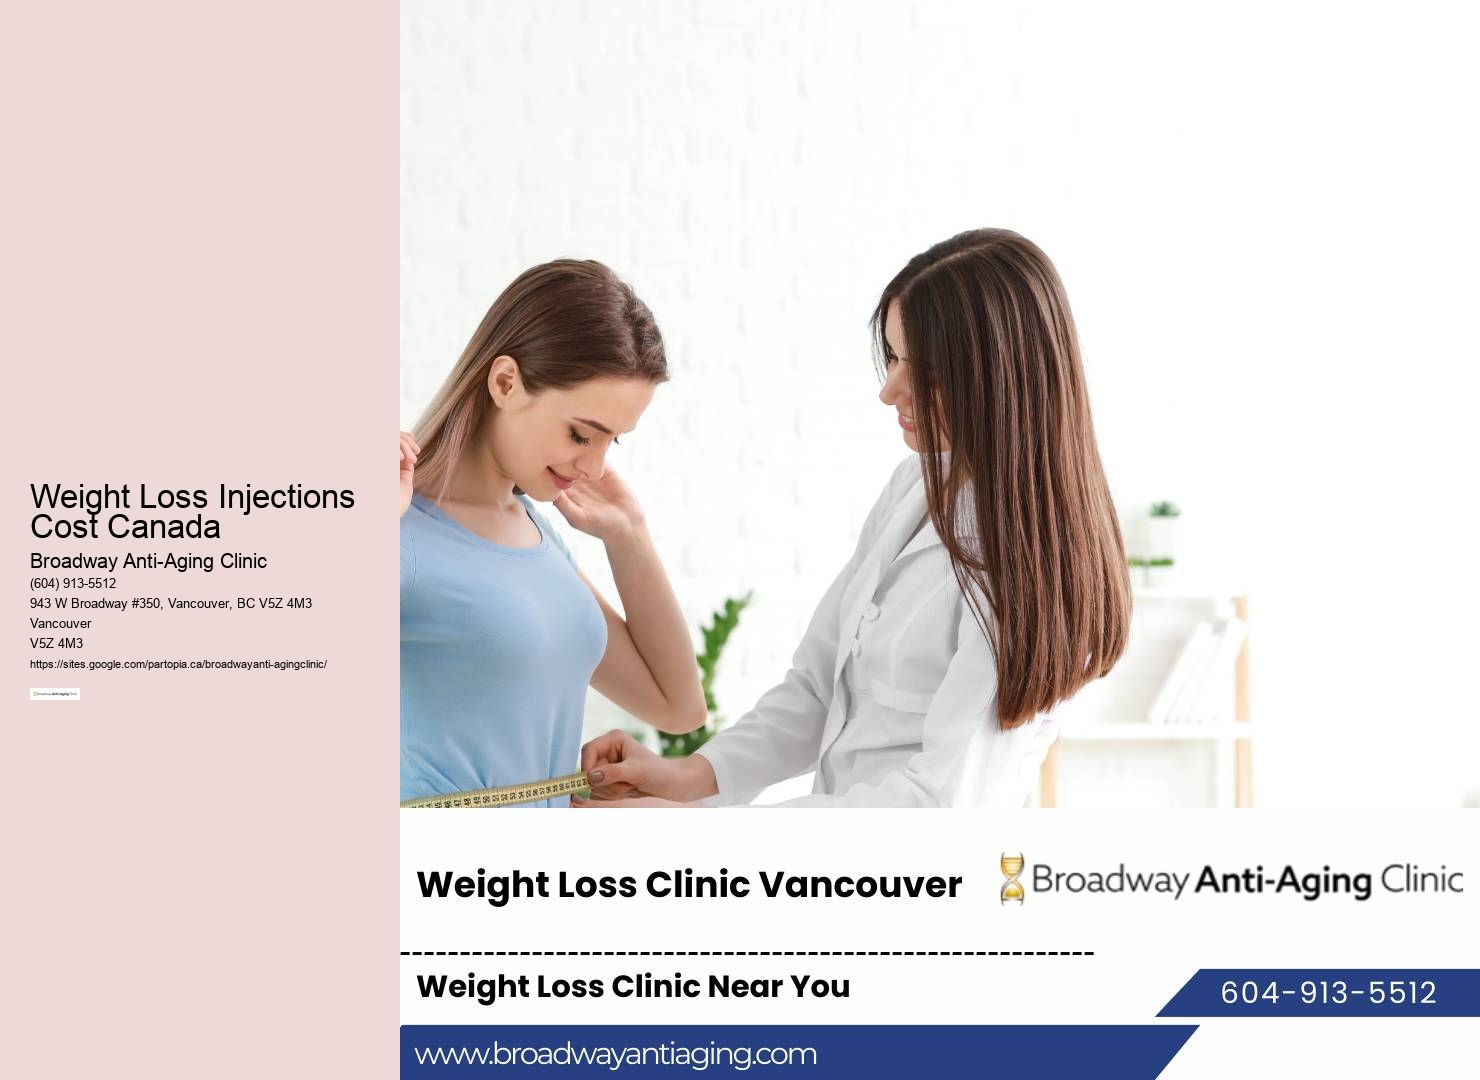 Weight Loss Injections Cost Canada